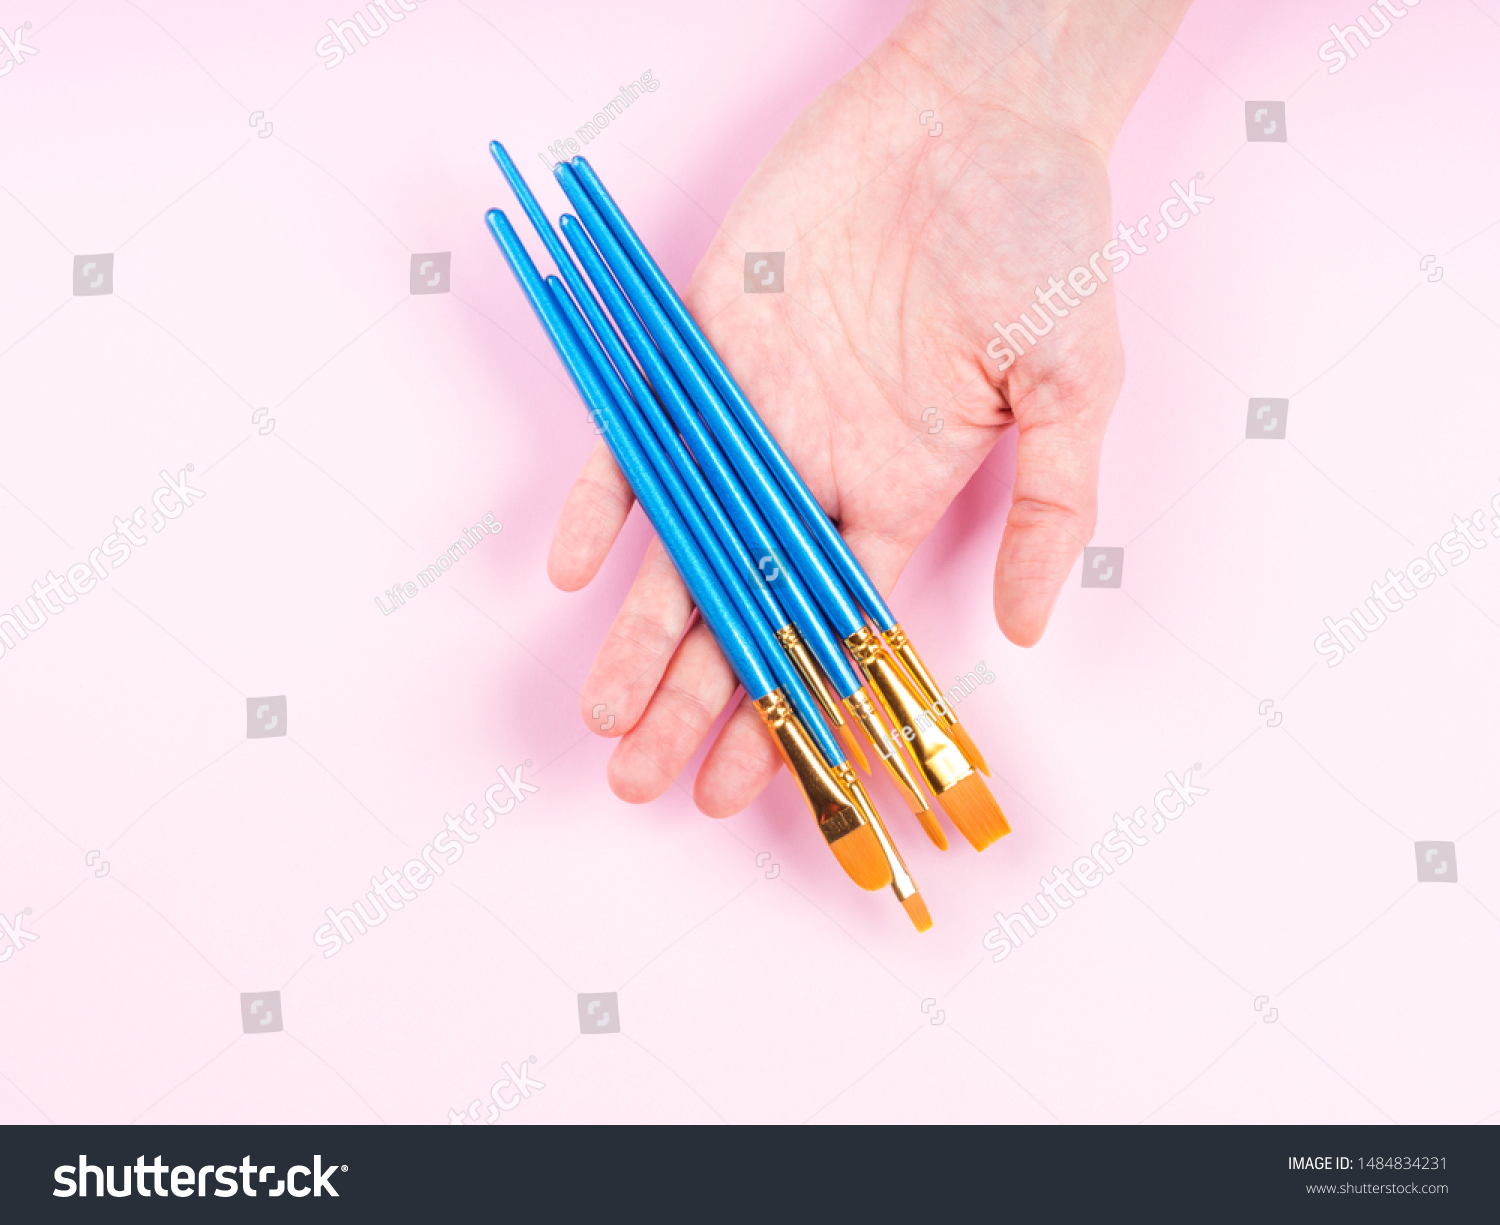 Blue paintbrushes in woman's hand on pink background. Art supply, art school education concept #1484834231